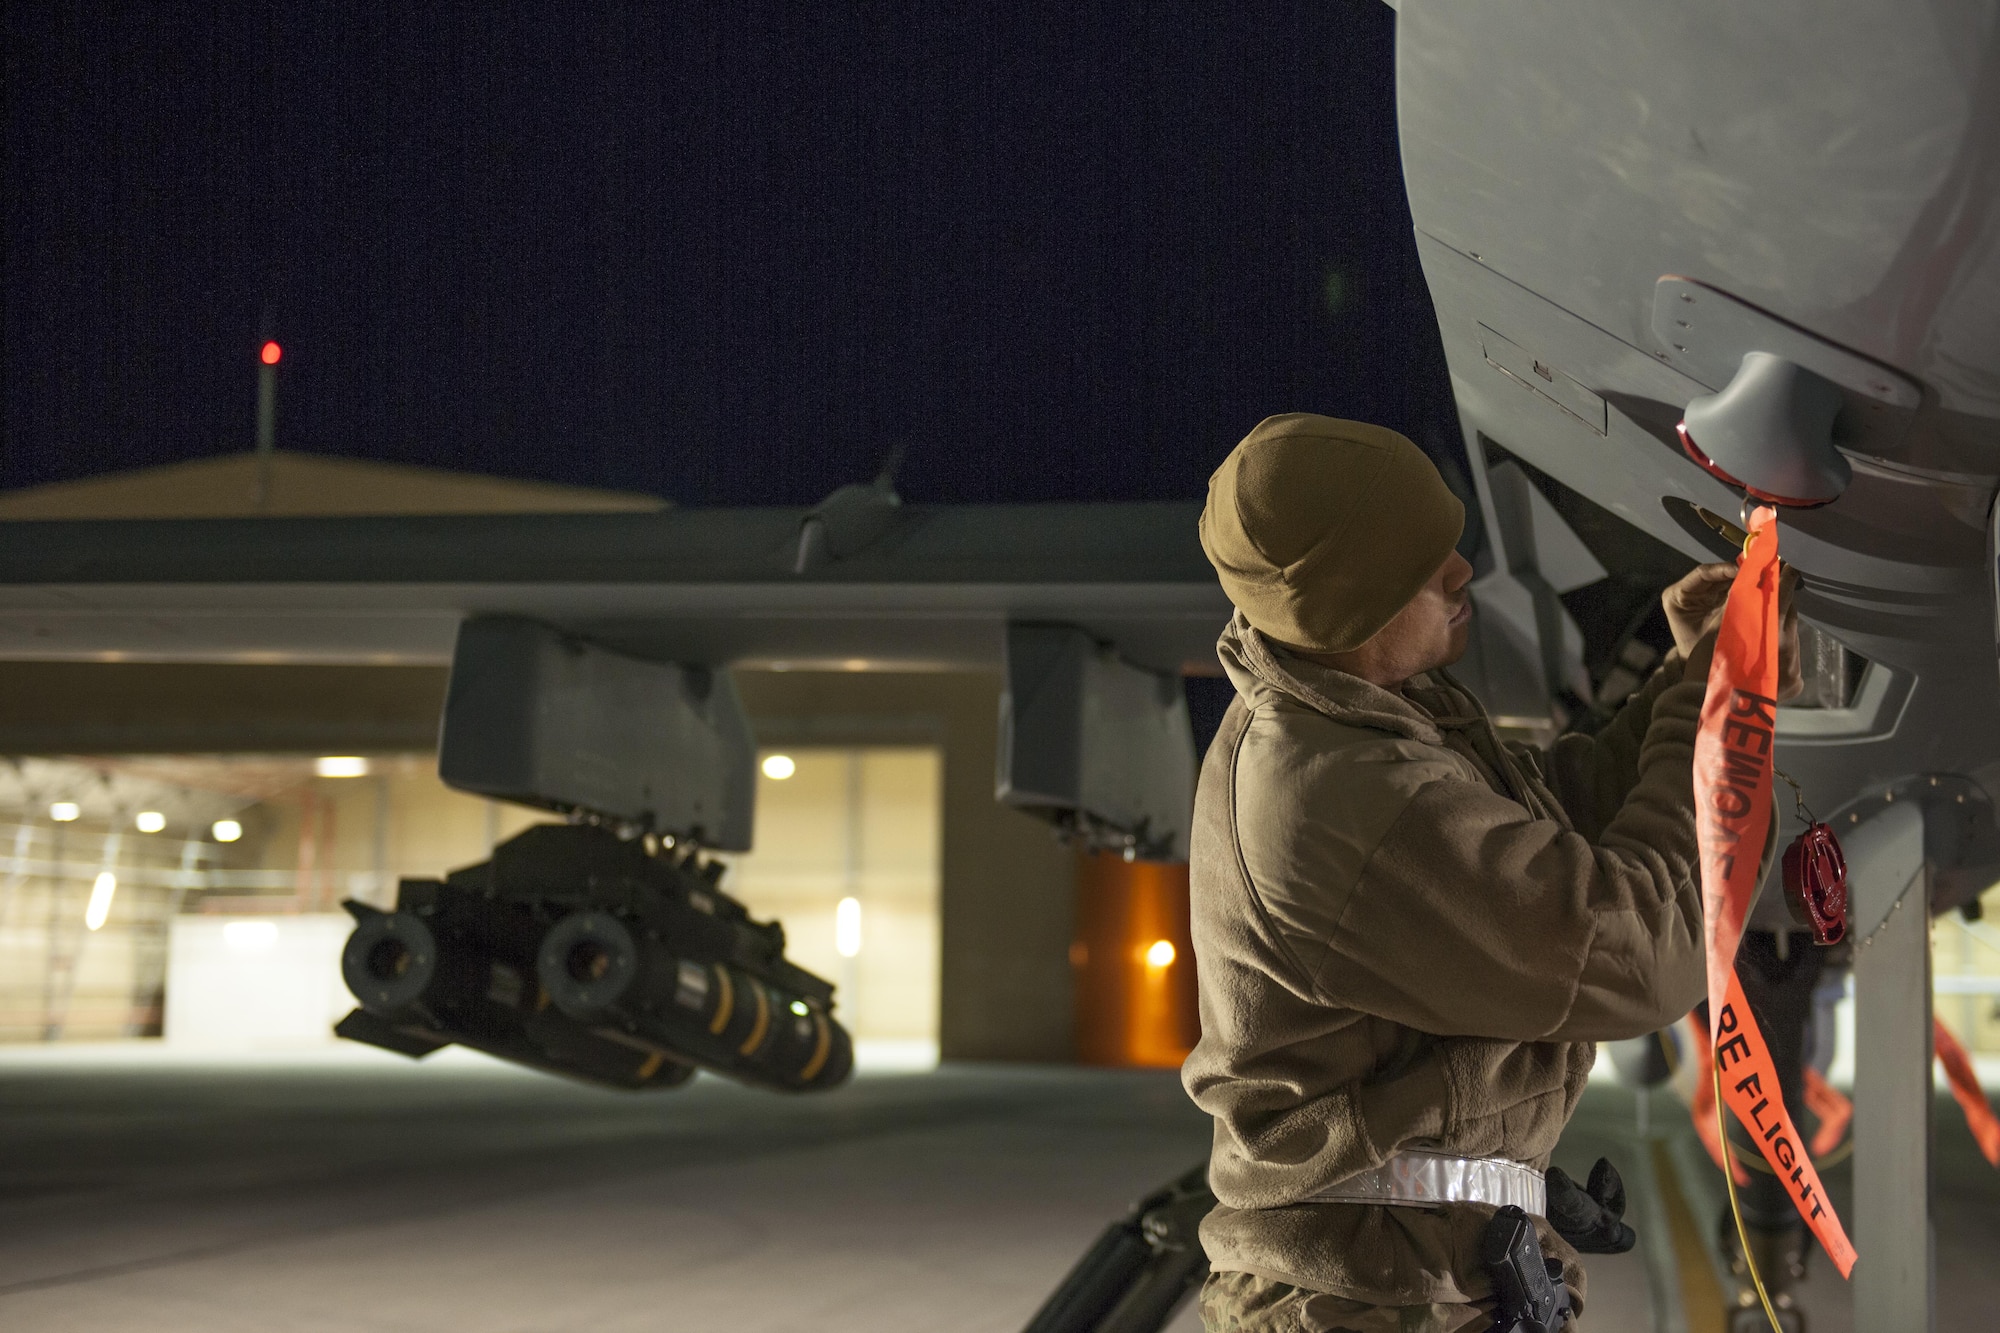 Master Sgt. George, 62nd Expeditionary Reconnaissance Squadron production superintendent, replaces a cap on an MQ-9 Reaper at Kandahar Airfield, Afghanistan, Dec. 6, 2015. The Reaper is an armed, multi-mission, medium-altitude, long-endurance remotely piloted aircraft that is employed primarily as an intelligence-collection asset and secondarily against dynamic execution targets. (U.S. Air Force photo by Tech. Sgt. Robert Cloys/Released)